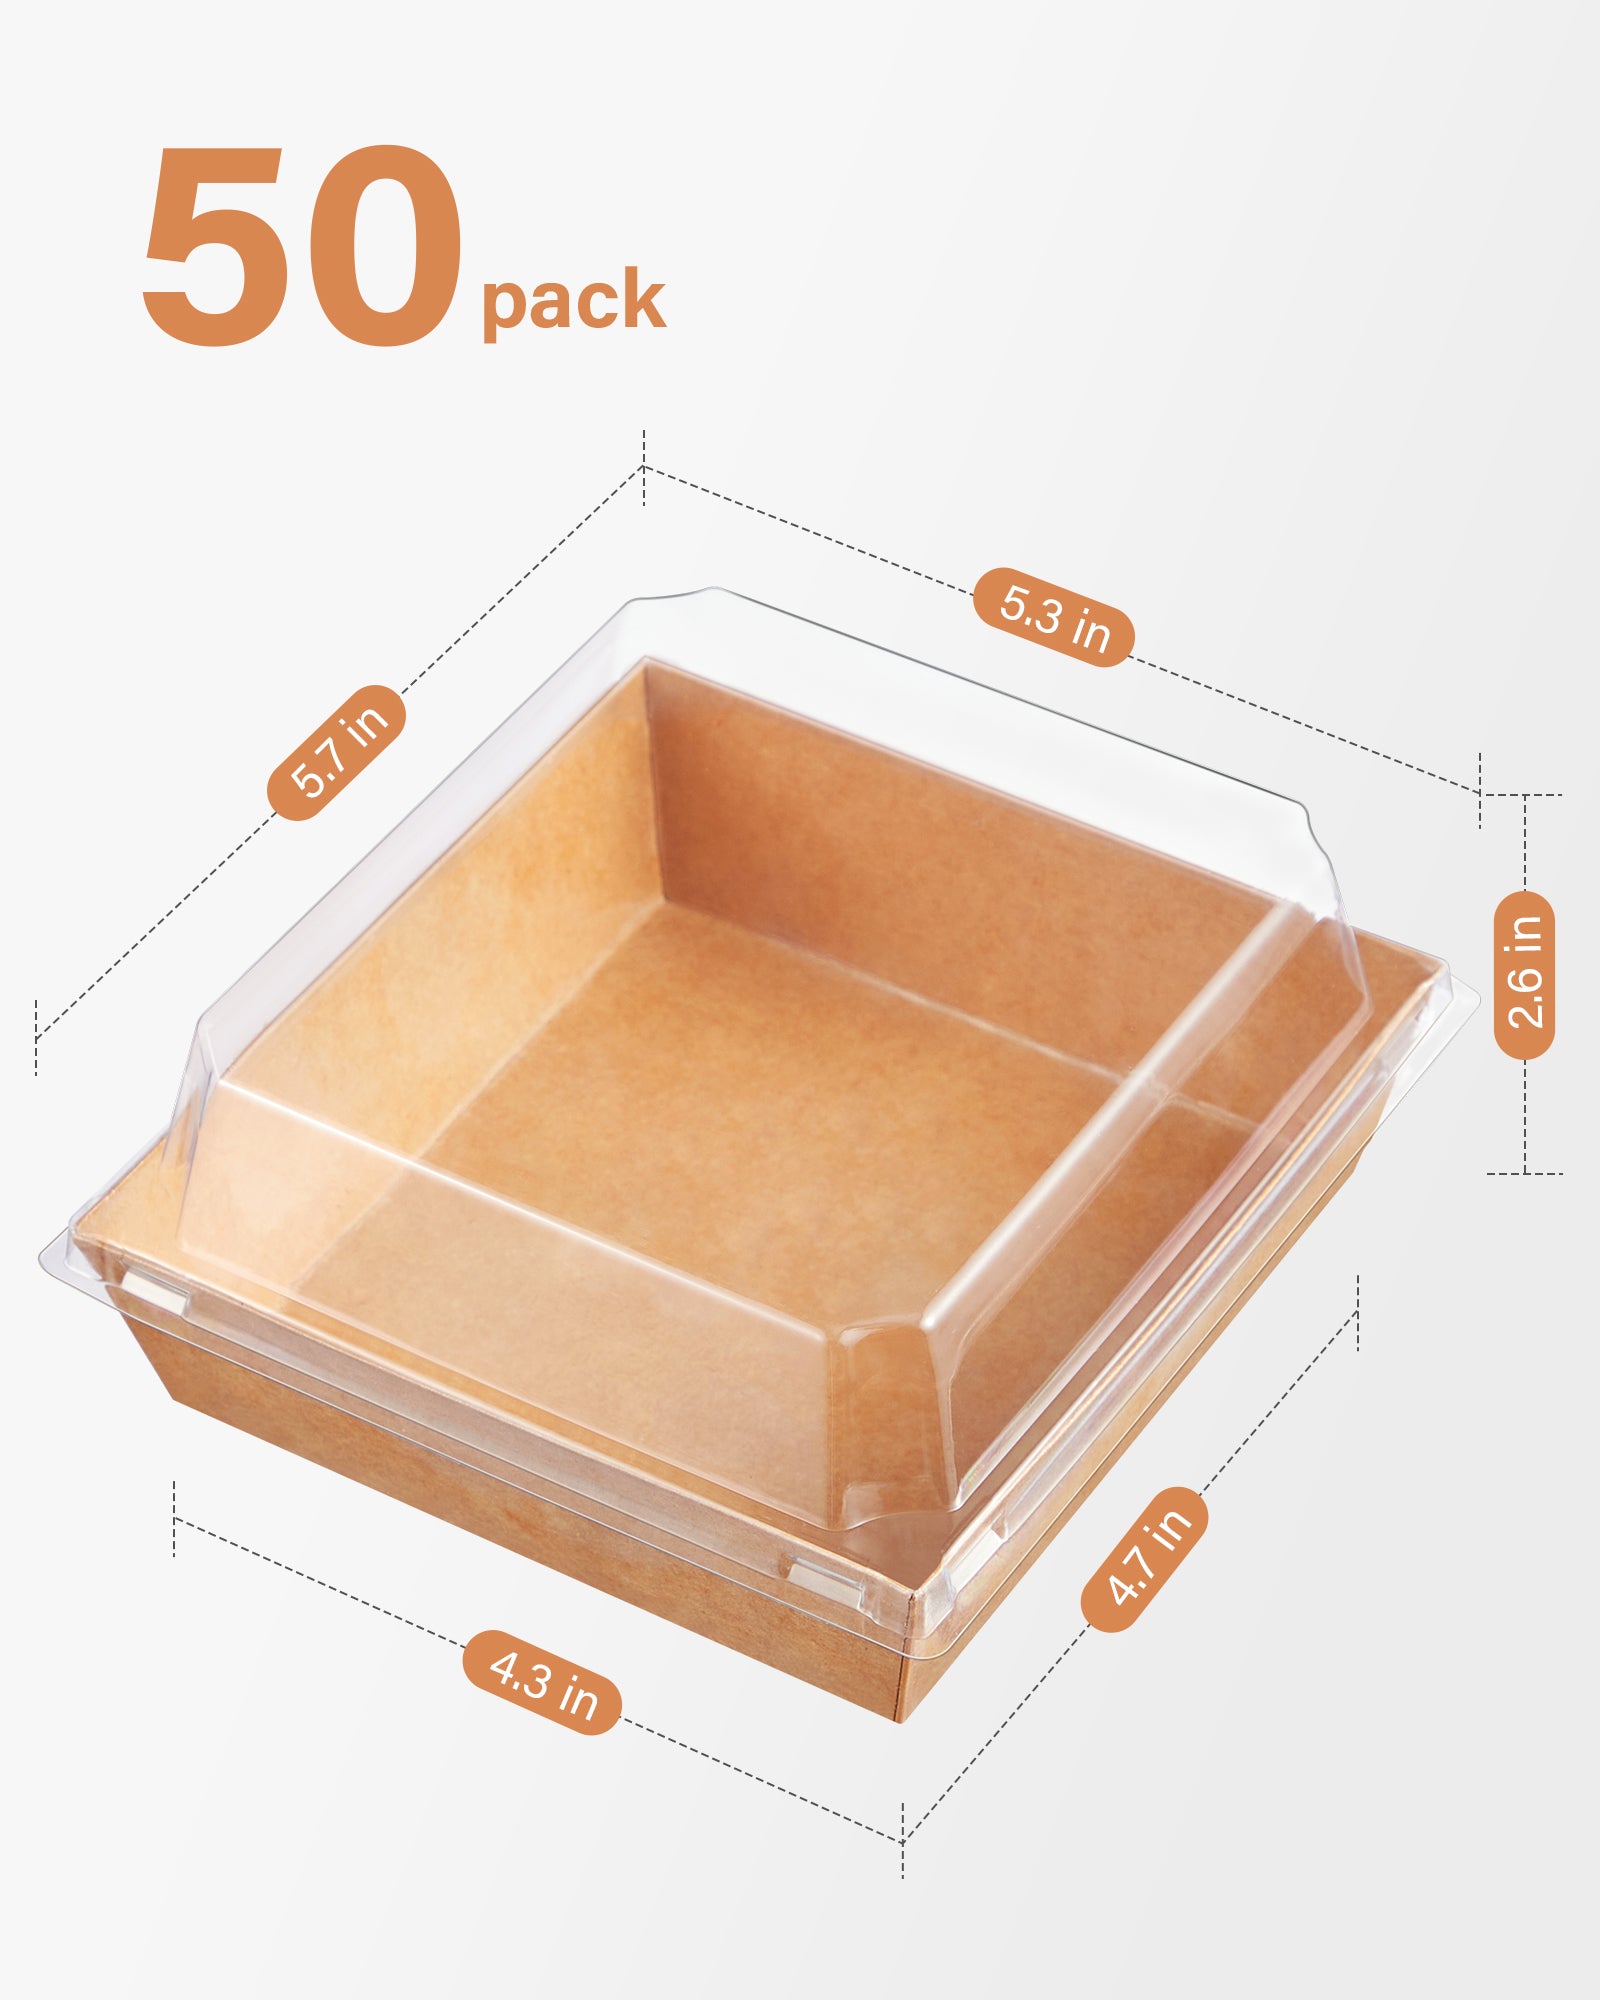 Kootek 50 Pack Charcuterie Boxes with Clear Lids, 5.7 Inches Disposable Dessert Boxes To Go, Square Small Individual Food Containers Bakery Box for Sandwich, Slice Cake, Cookies, Hot Cocoa Bombs, Strawberries